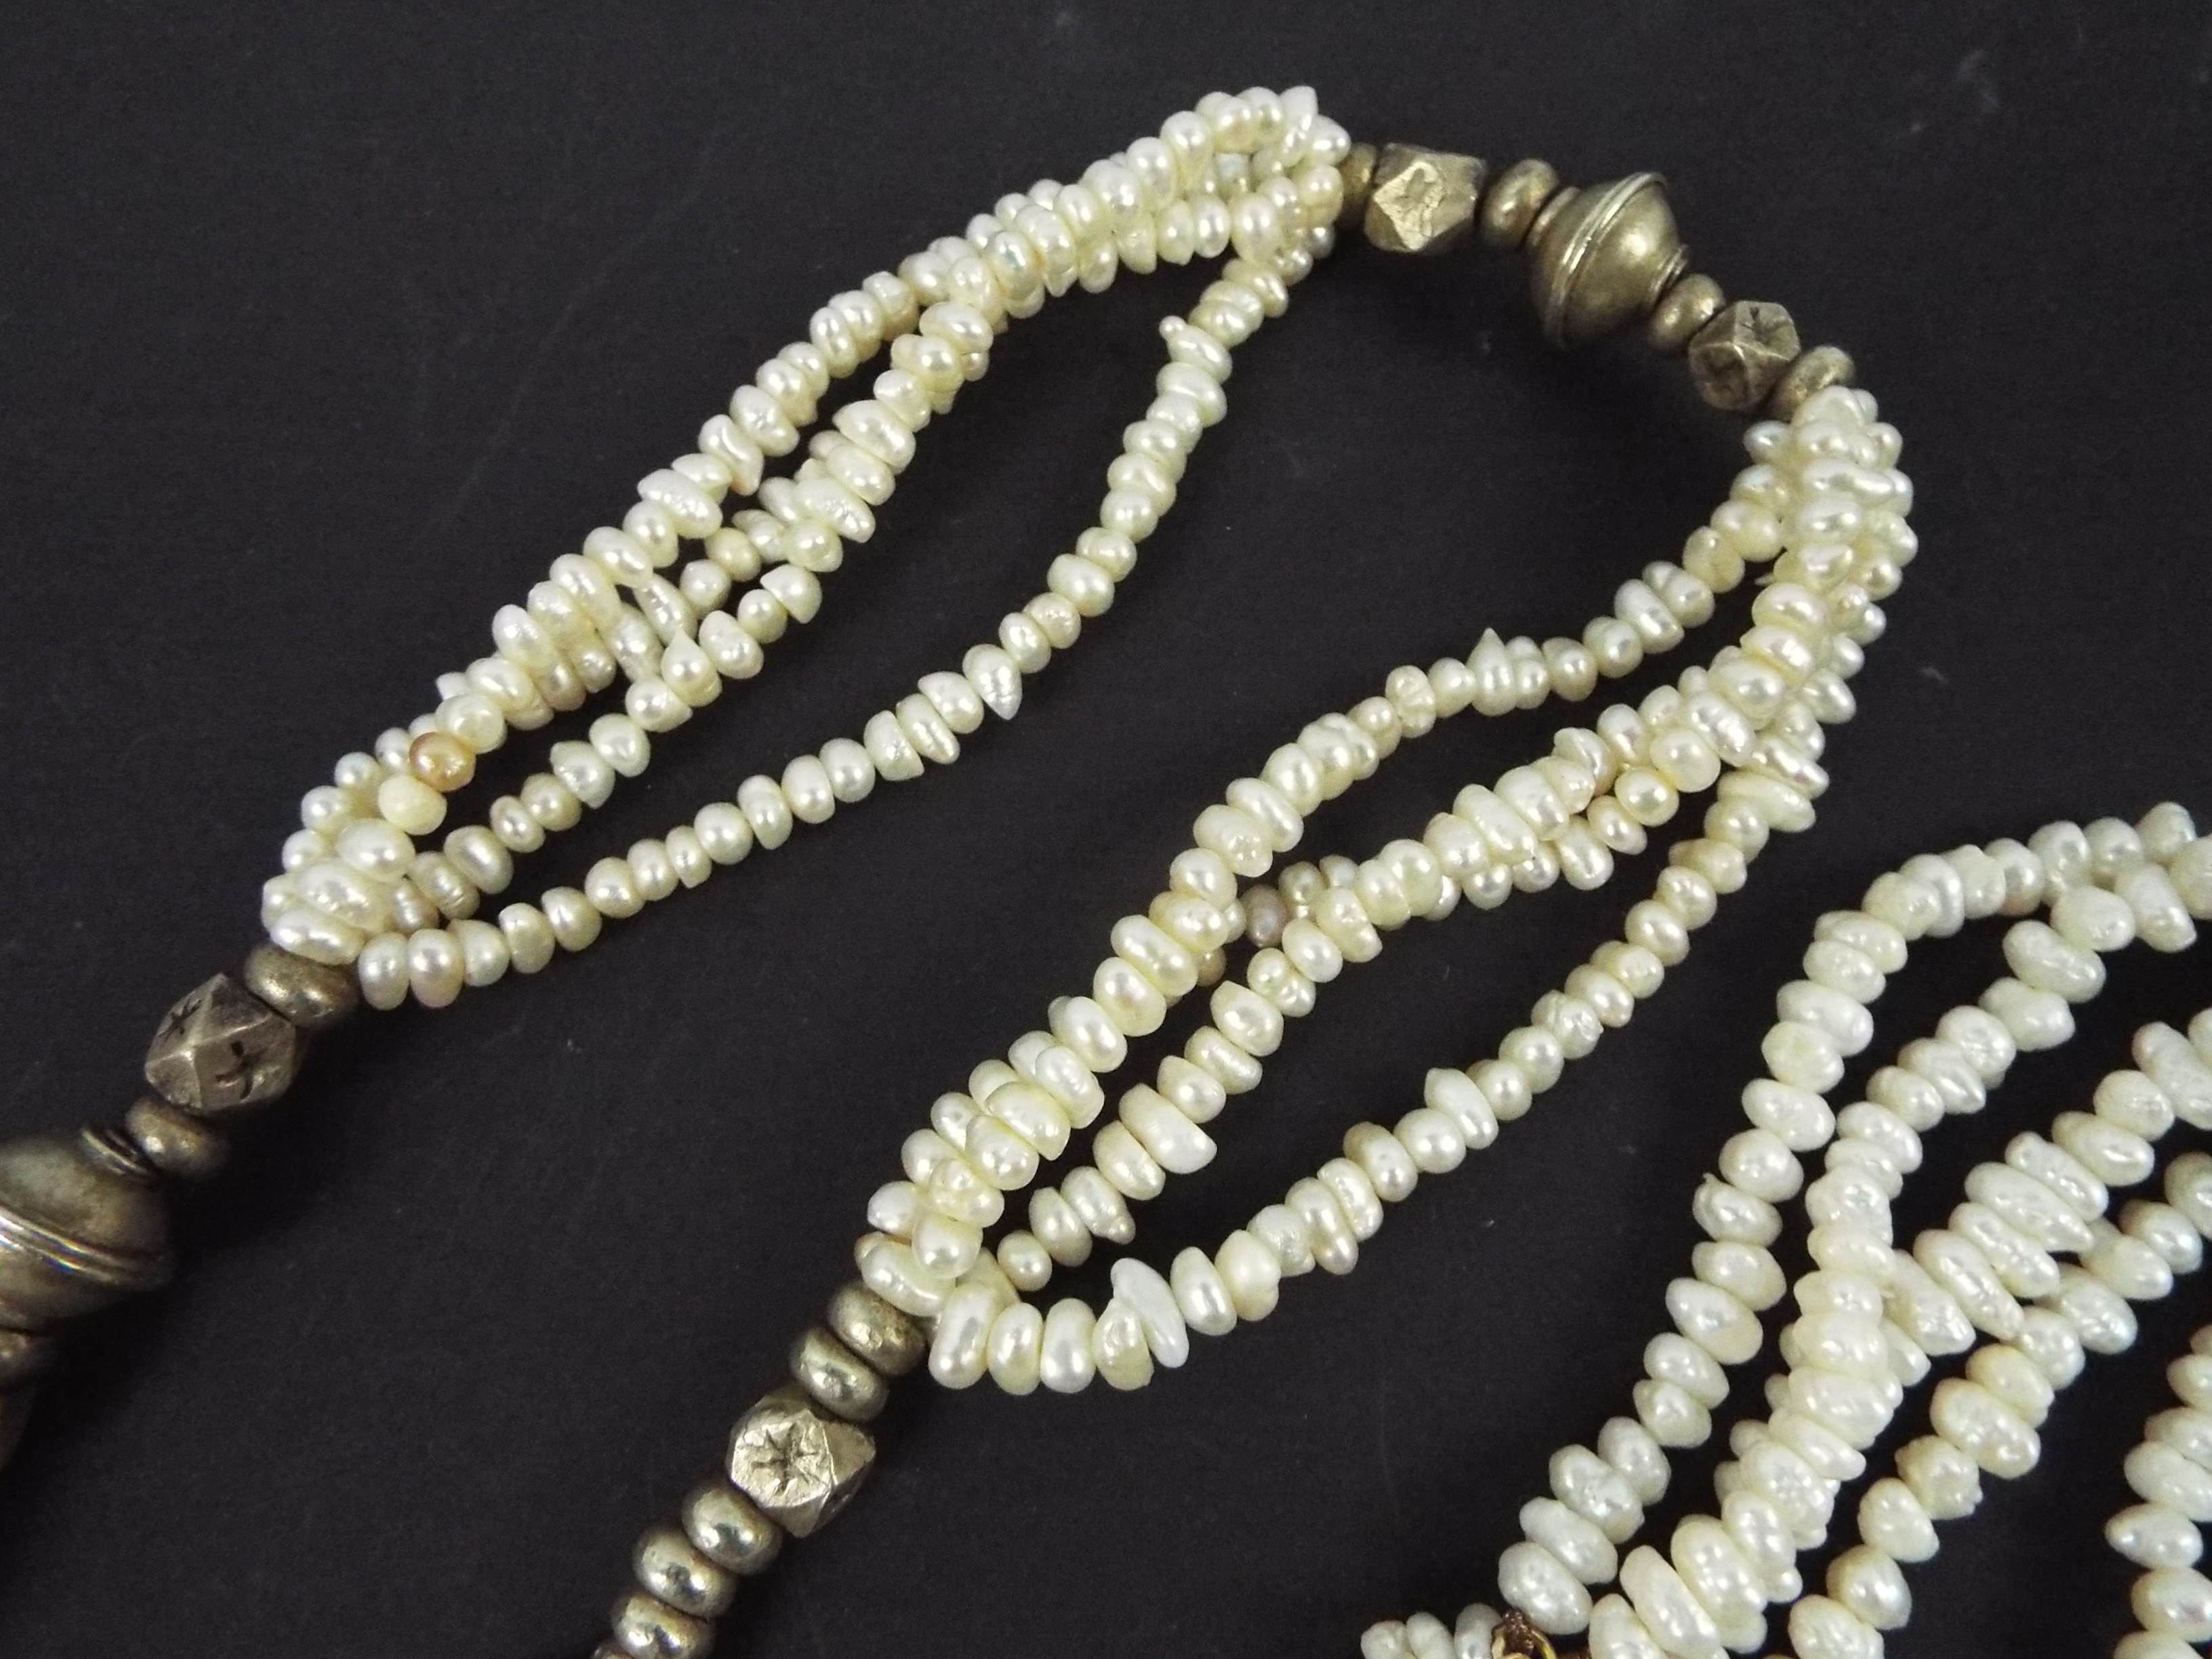 Two multi-strand necklaces, one with gilt metal clasp, longest 47 cm. - Image 5 of 5